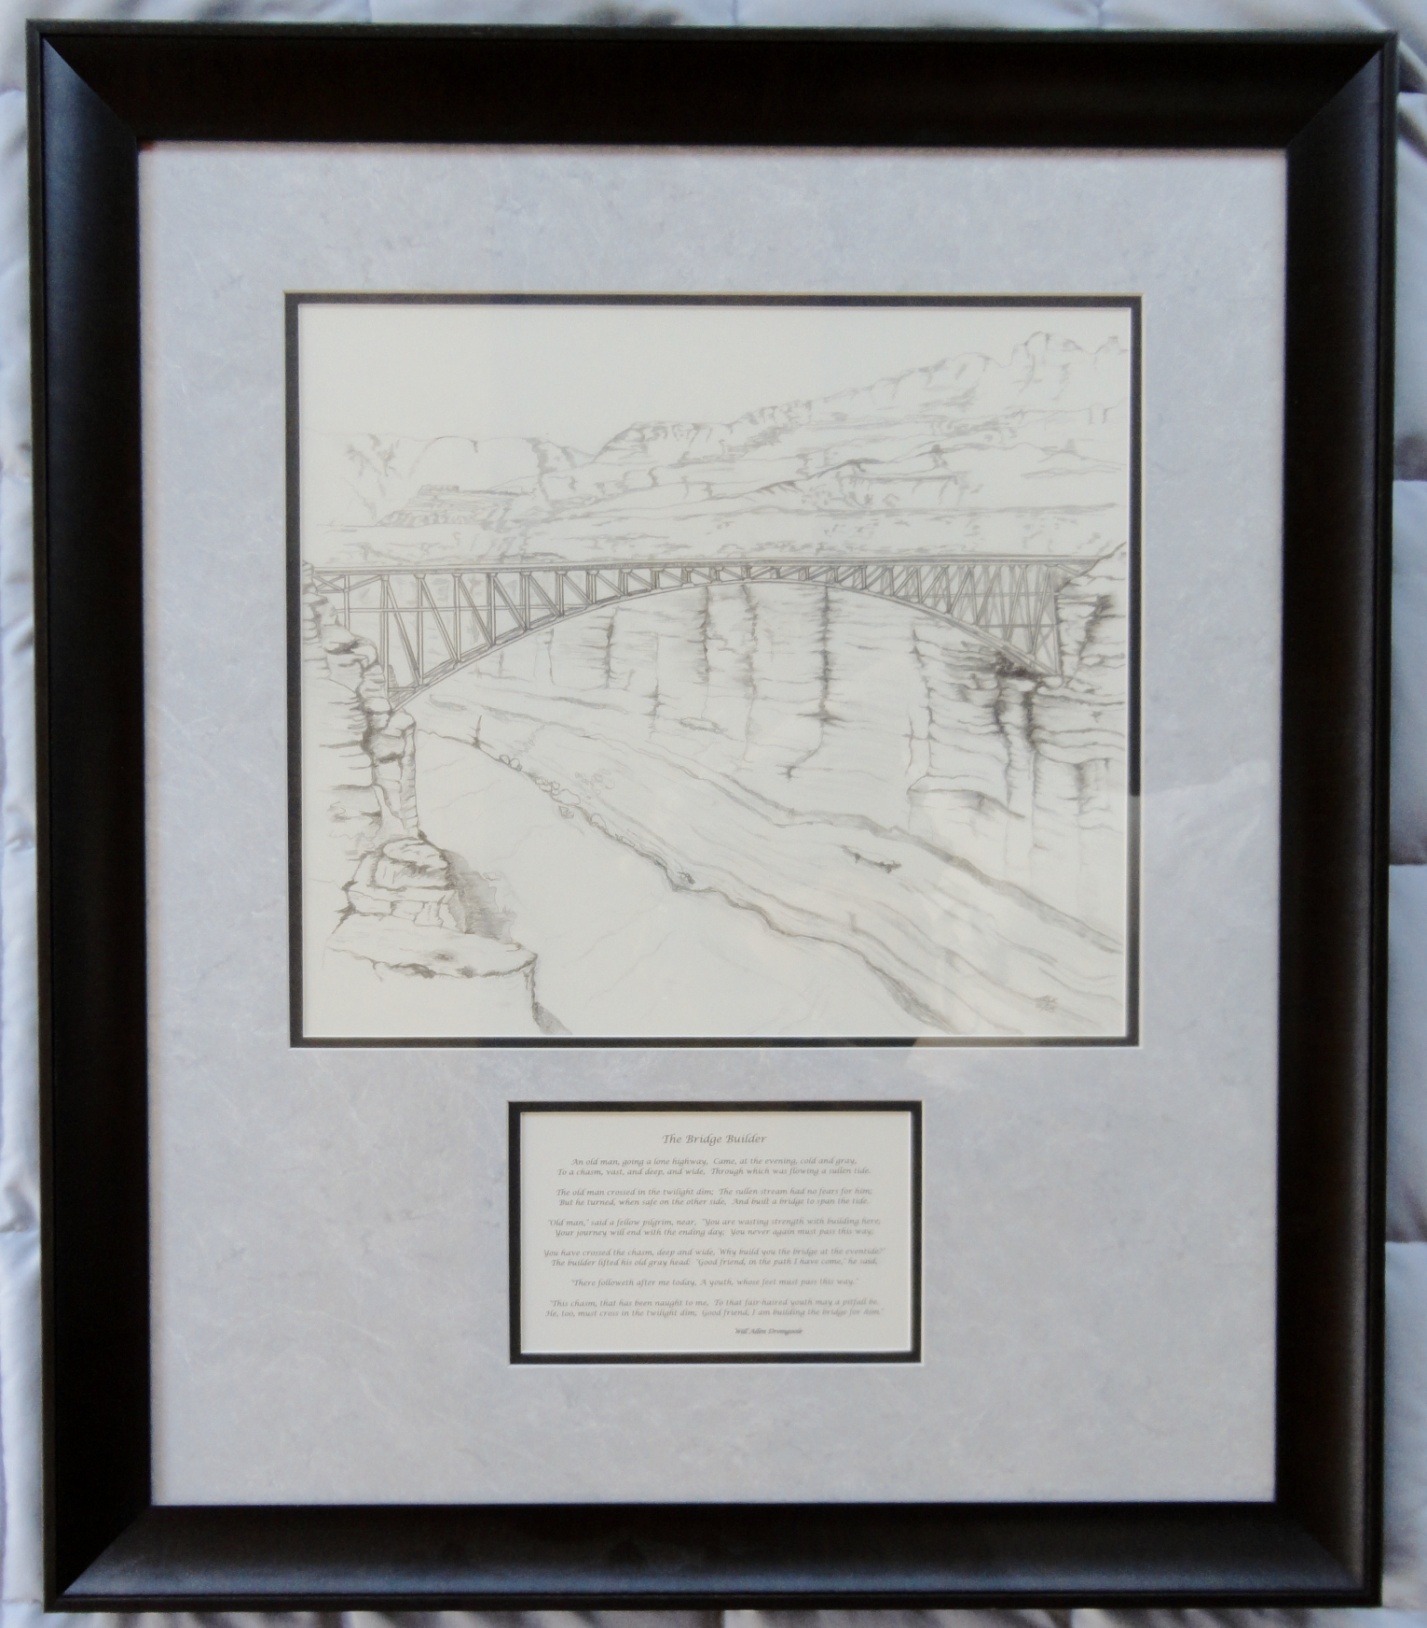 Picture of Bridge drawn by son with poem underneath